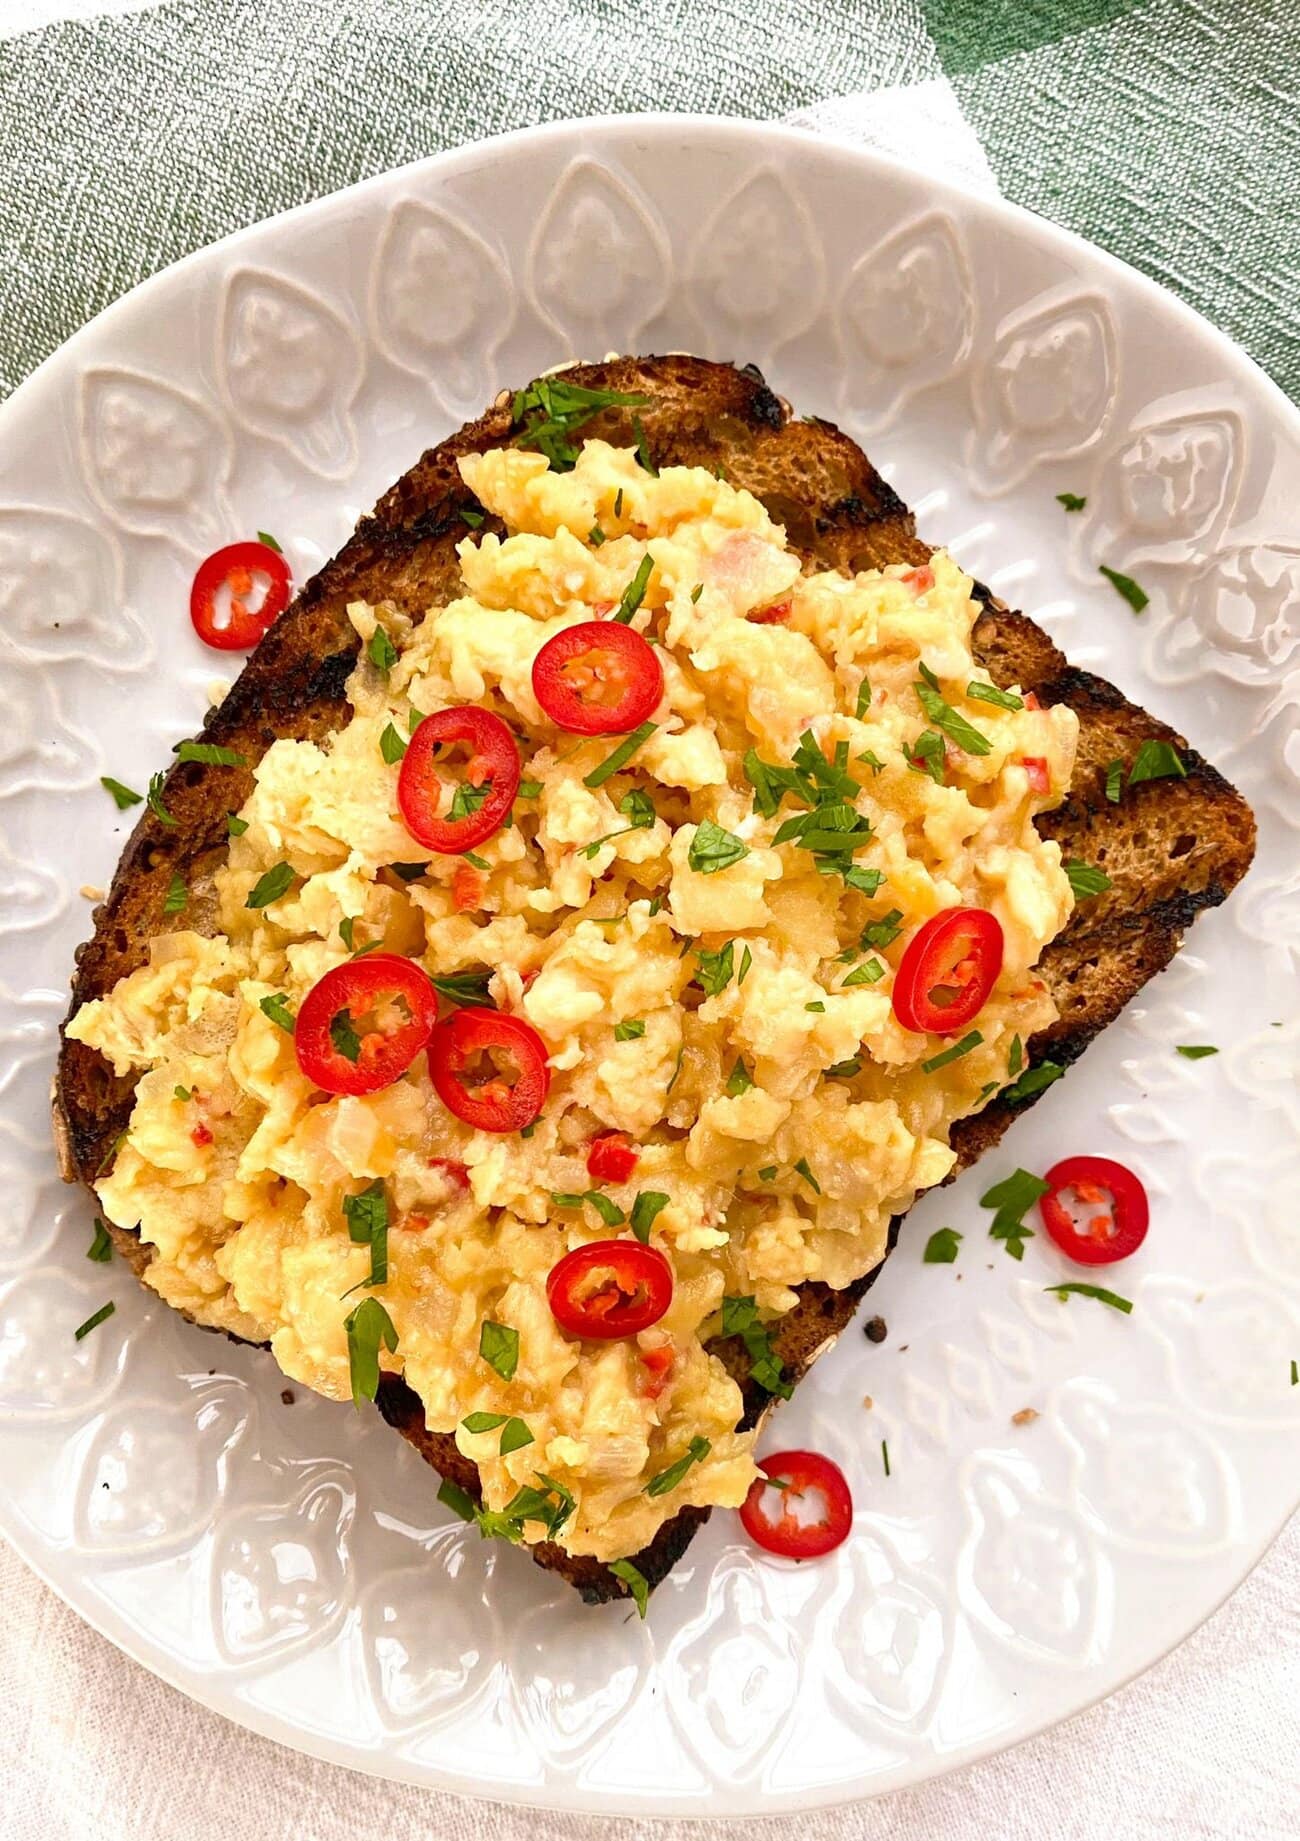 White plate with a slice of toasted granary bread topped with chili scrambled eggs and garnished with slices of red chili and freshly chopped parsley